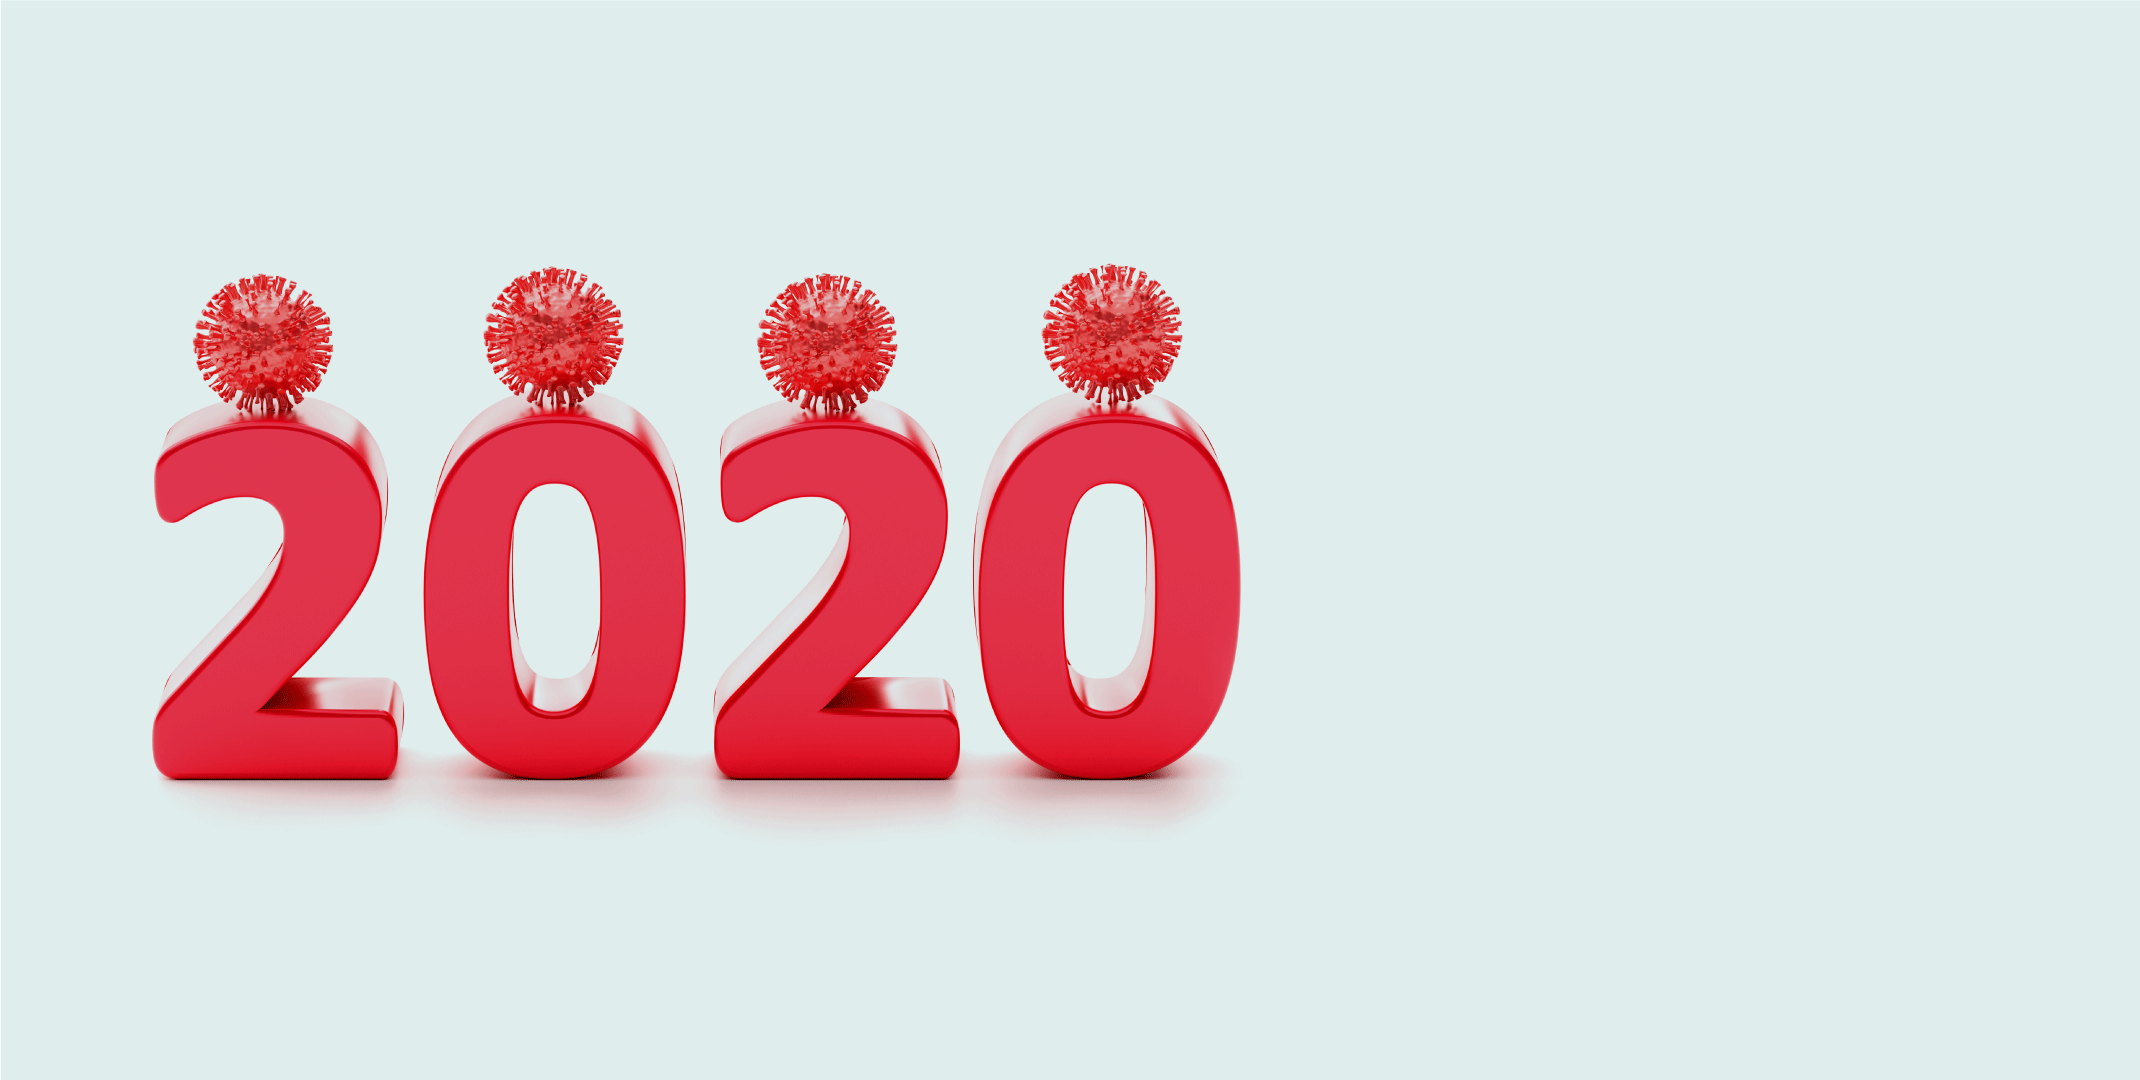 4 Lessons to learn from the Revolution of 2020